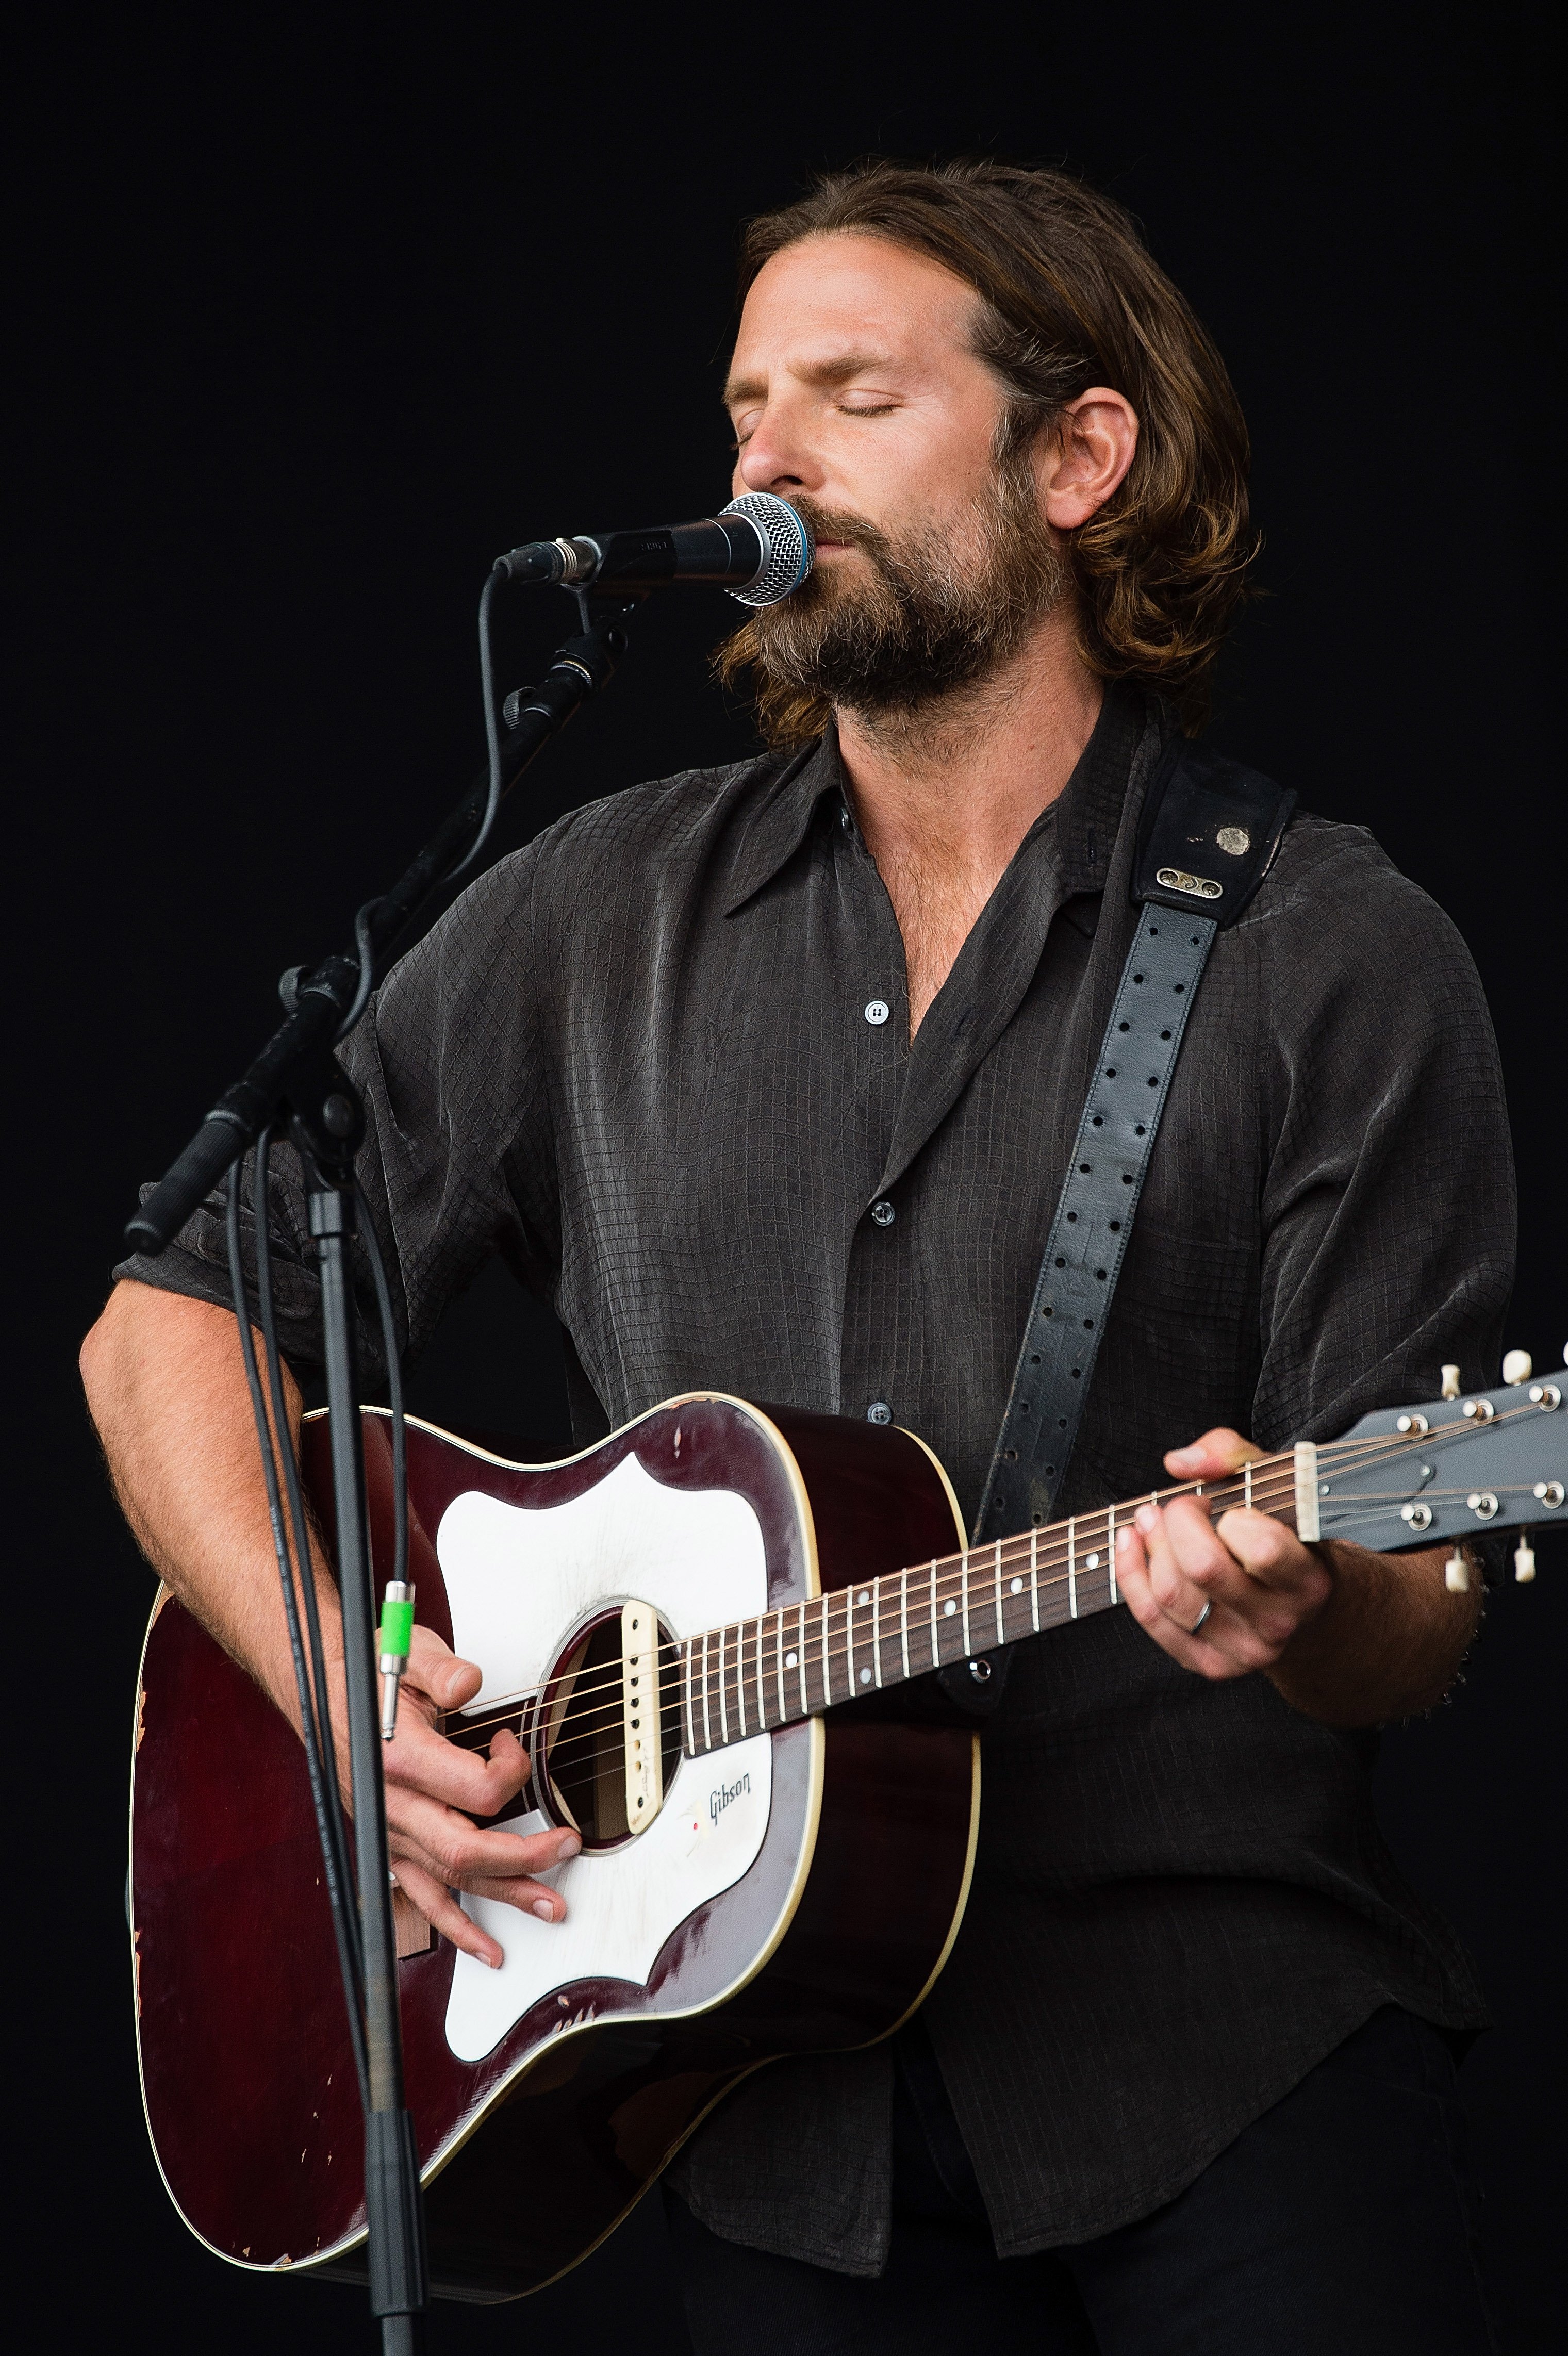 Bradley Cooper during his 2017 performance in  "A Star is Born" in Worthy Farm. | Photo: Getty Images